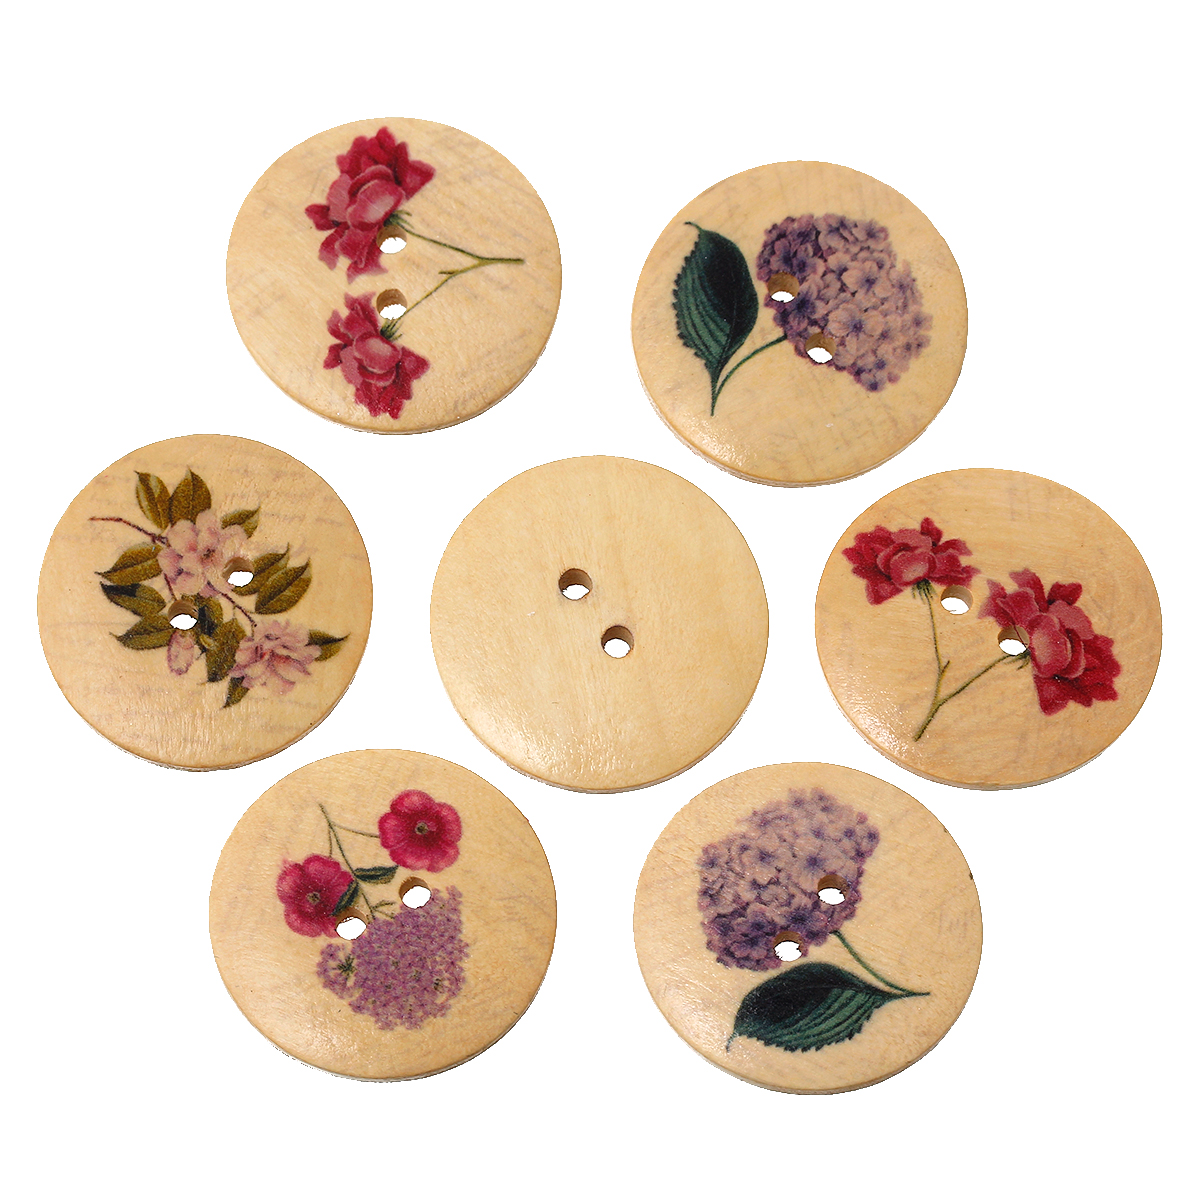 Picture of Wood Sewing Buttons Scrapbooking Round At Random 2 Holes Flower Pattern 3cm Dia, 20 PCs